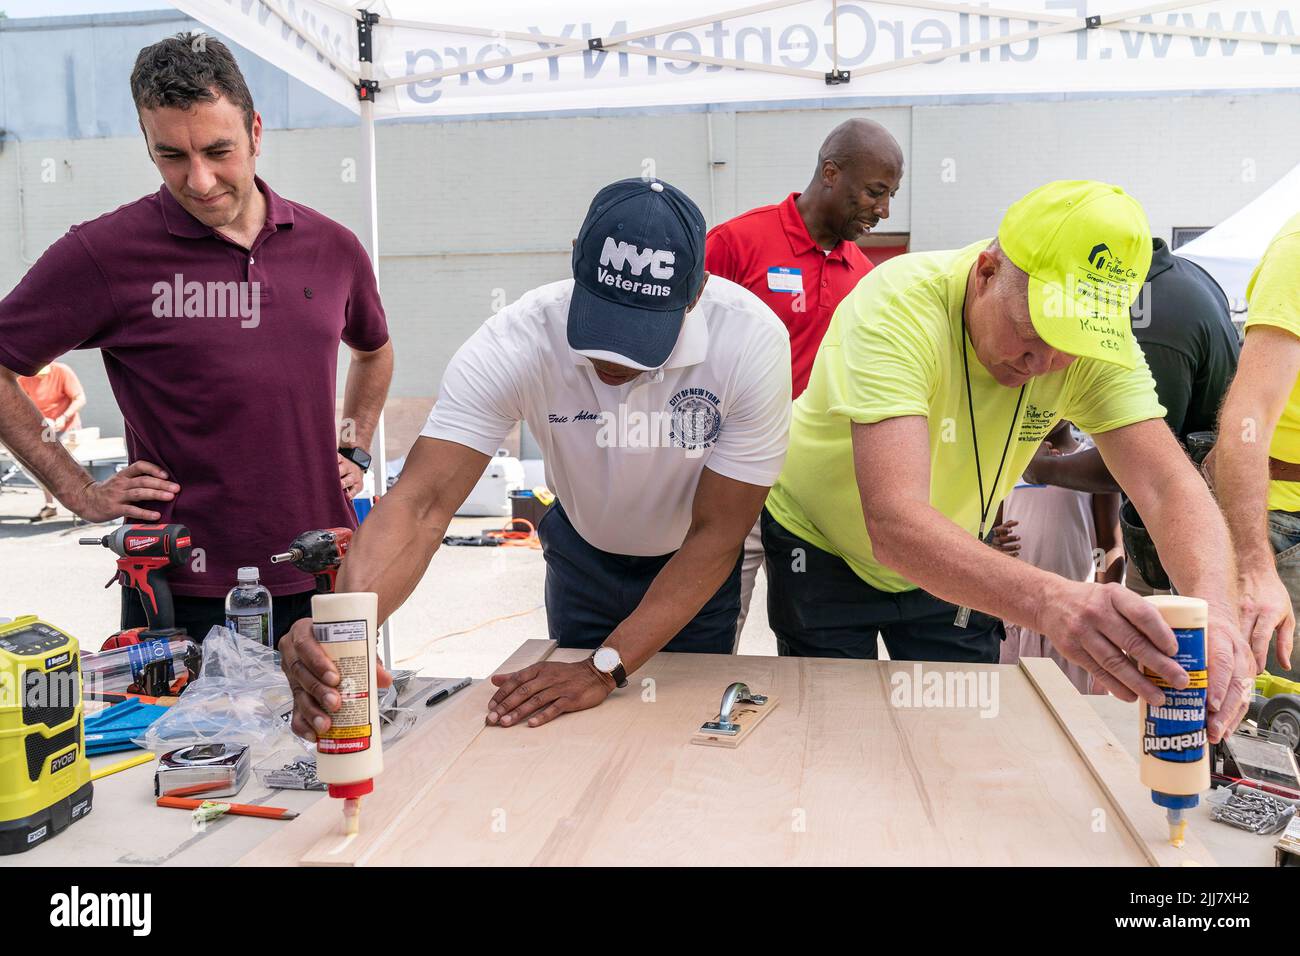 New York, USA. 23rd July, 2022. Mayor Eric Adams joined volunteers during DVS Furniture Build-a-Thon at JFK High School campus in New York on July 23, 2022. Furniture Build-a-Thon was organized by Fuller Center by volunteers to make foldable tables and stools for formerly homeless veterans who have recently moved into their new homes. (Photo by Lev Radin/Sipa USA) Credit: Sipa USA/Alamy Live News Stock Photo